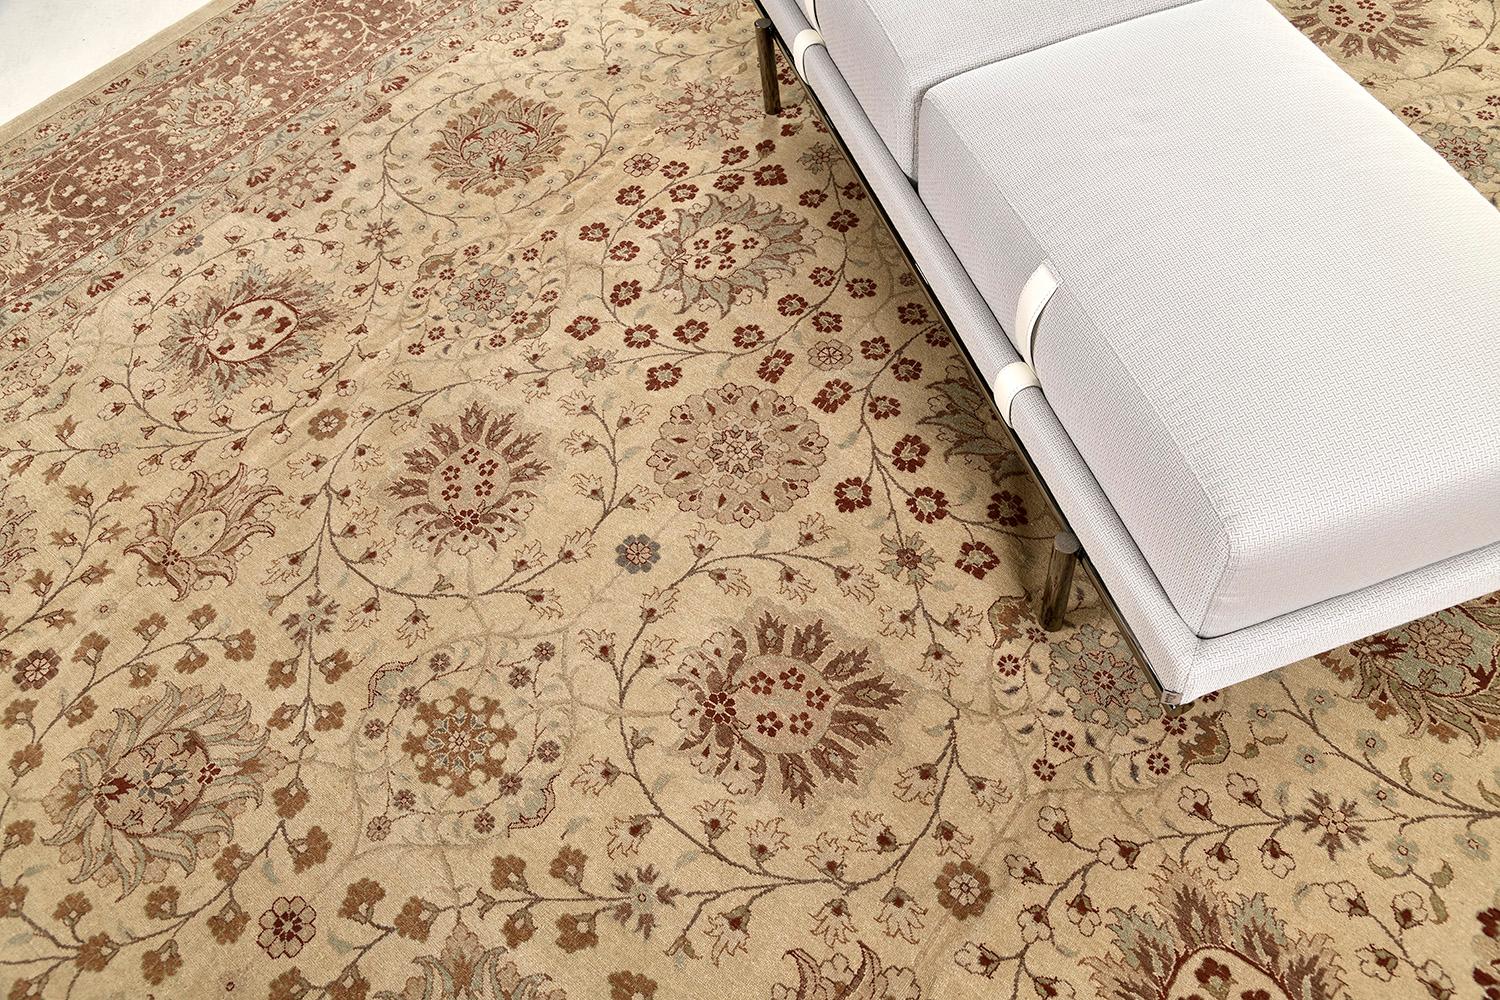 An impressive Tabriz Hadji Jalili revival rug that is rendered in earthy variegated shades of sand, tan and dusty blue. The all-over majestic botanical patterns of blooming palmettes, leafy tendrils, curved sickle leaves and stylized florals creates